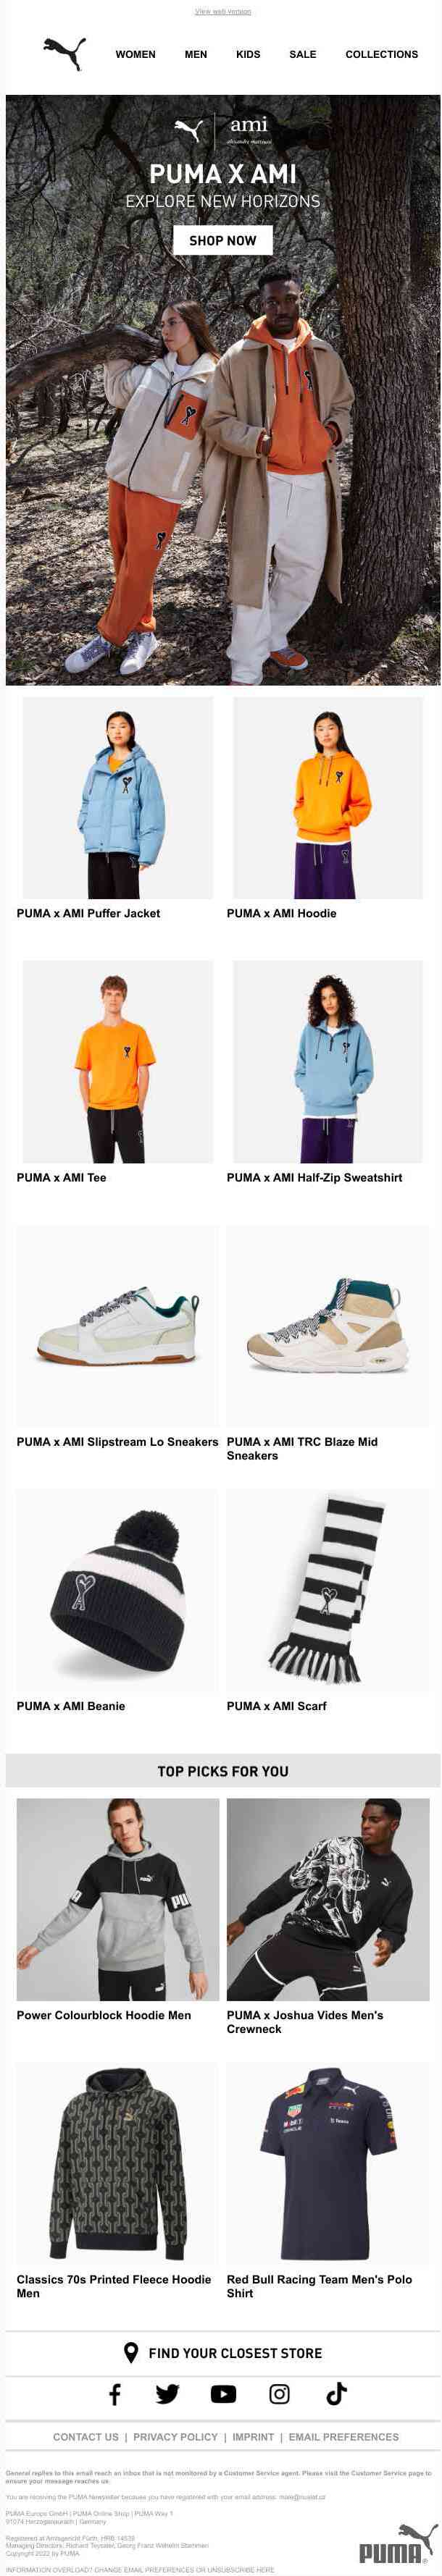 What’s New With PUMA x AMI